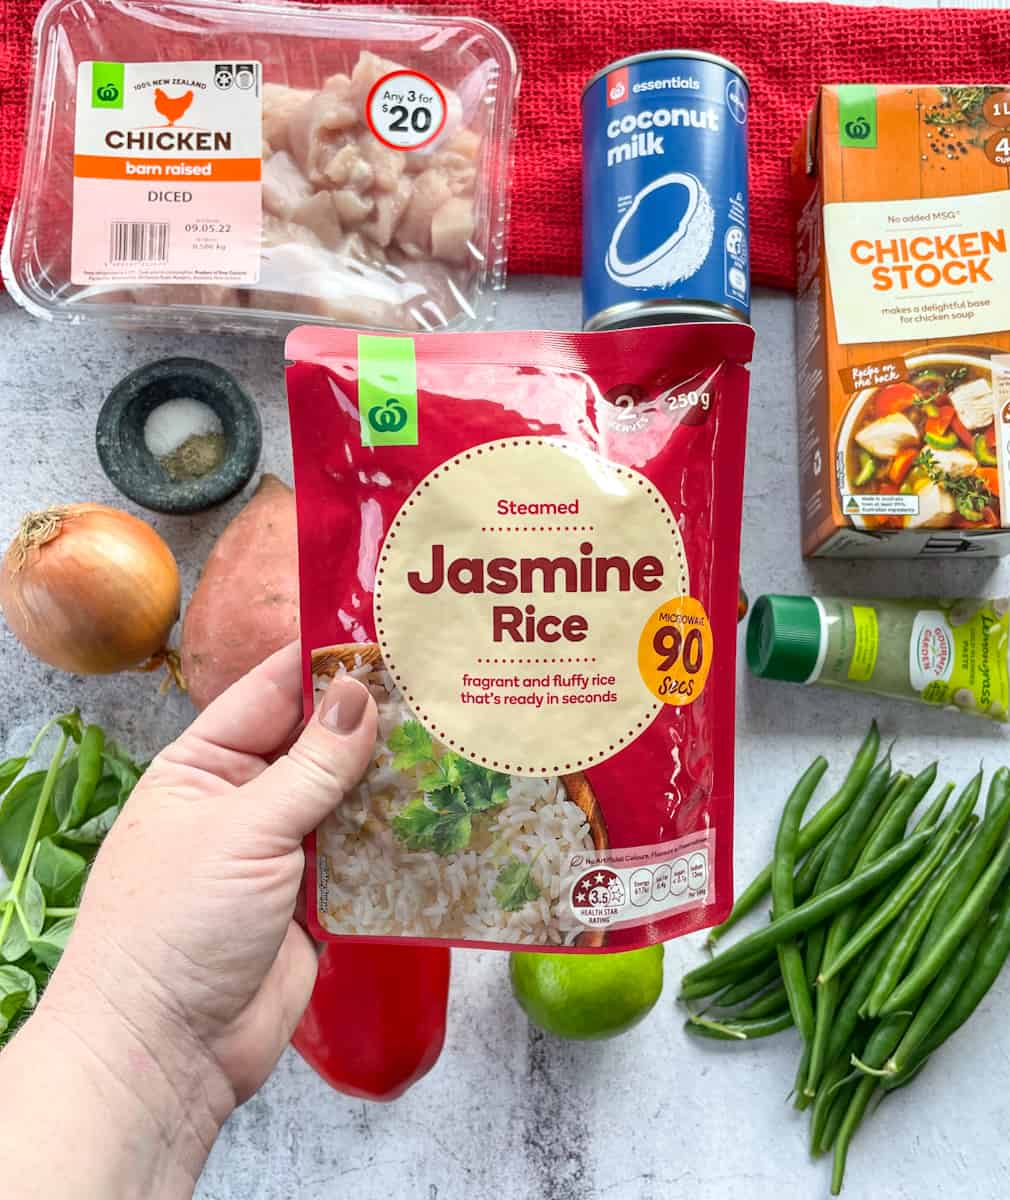 Pouch of Microwave Jasmine Rice from Countdown